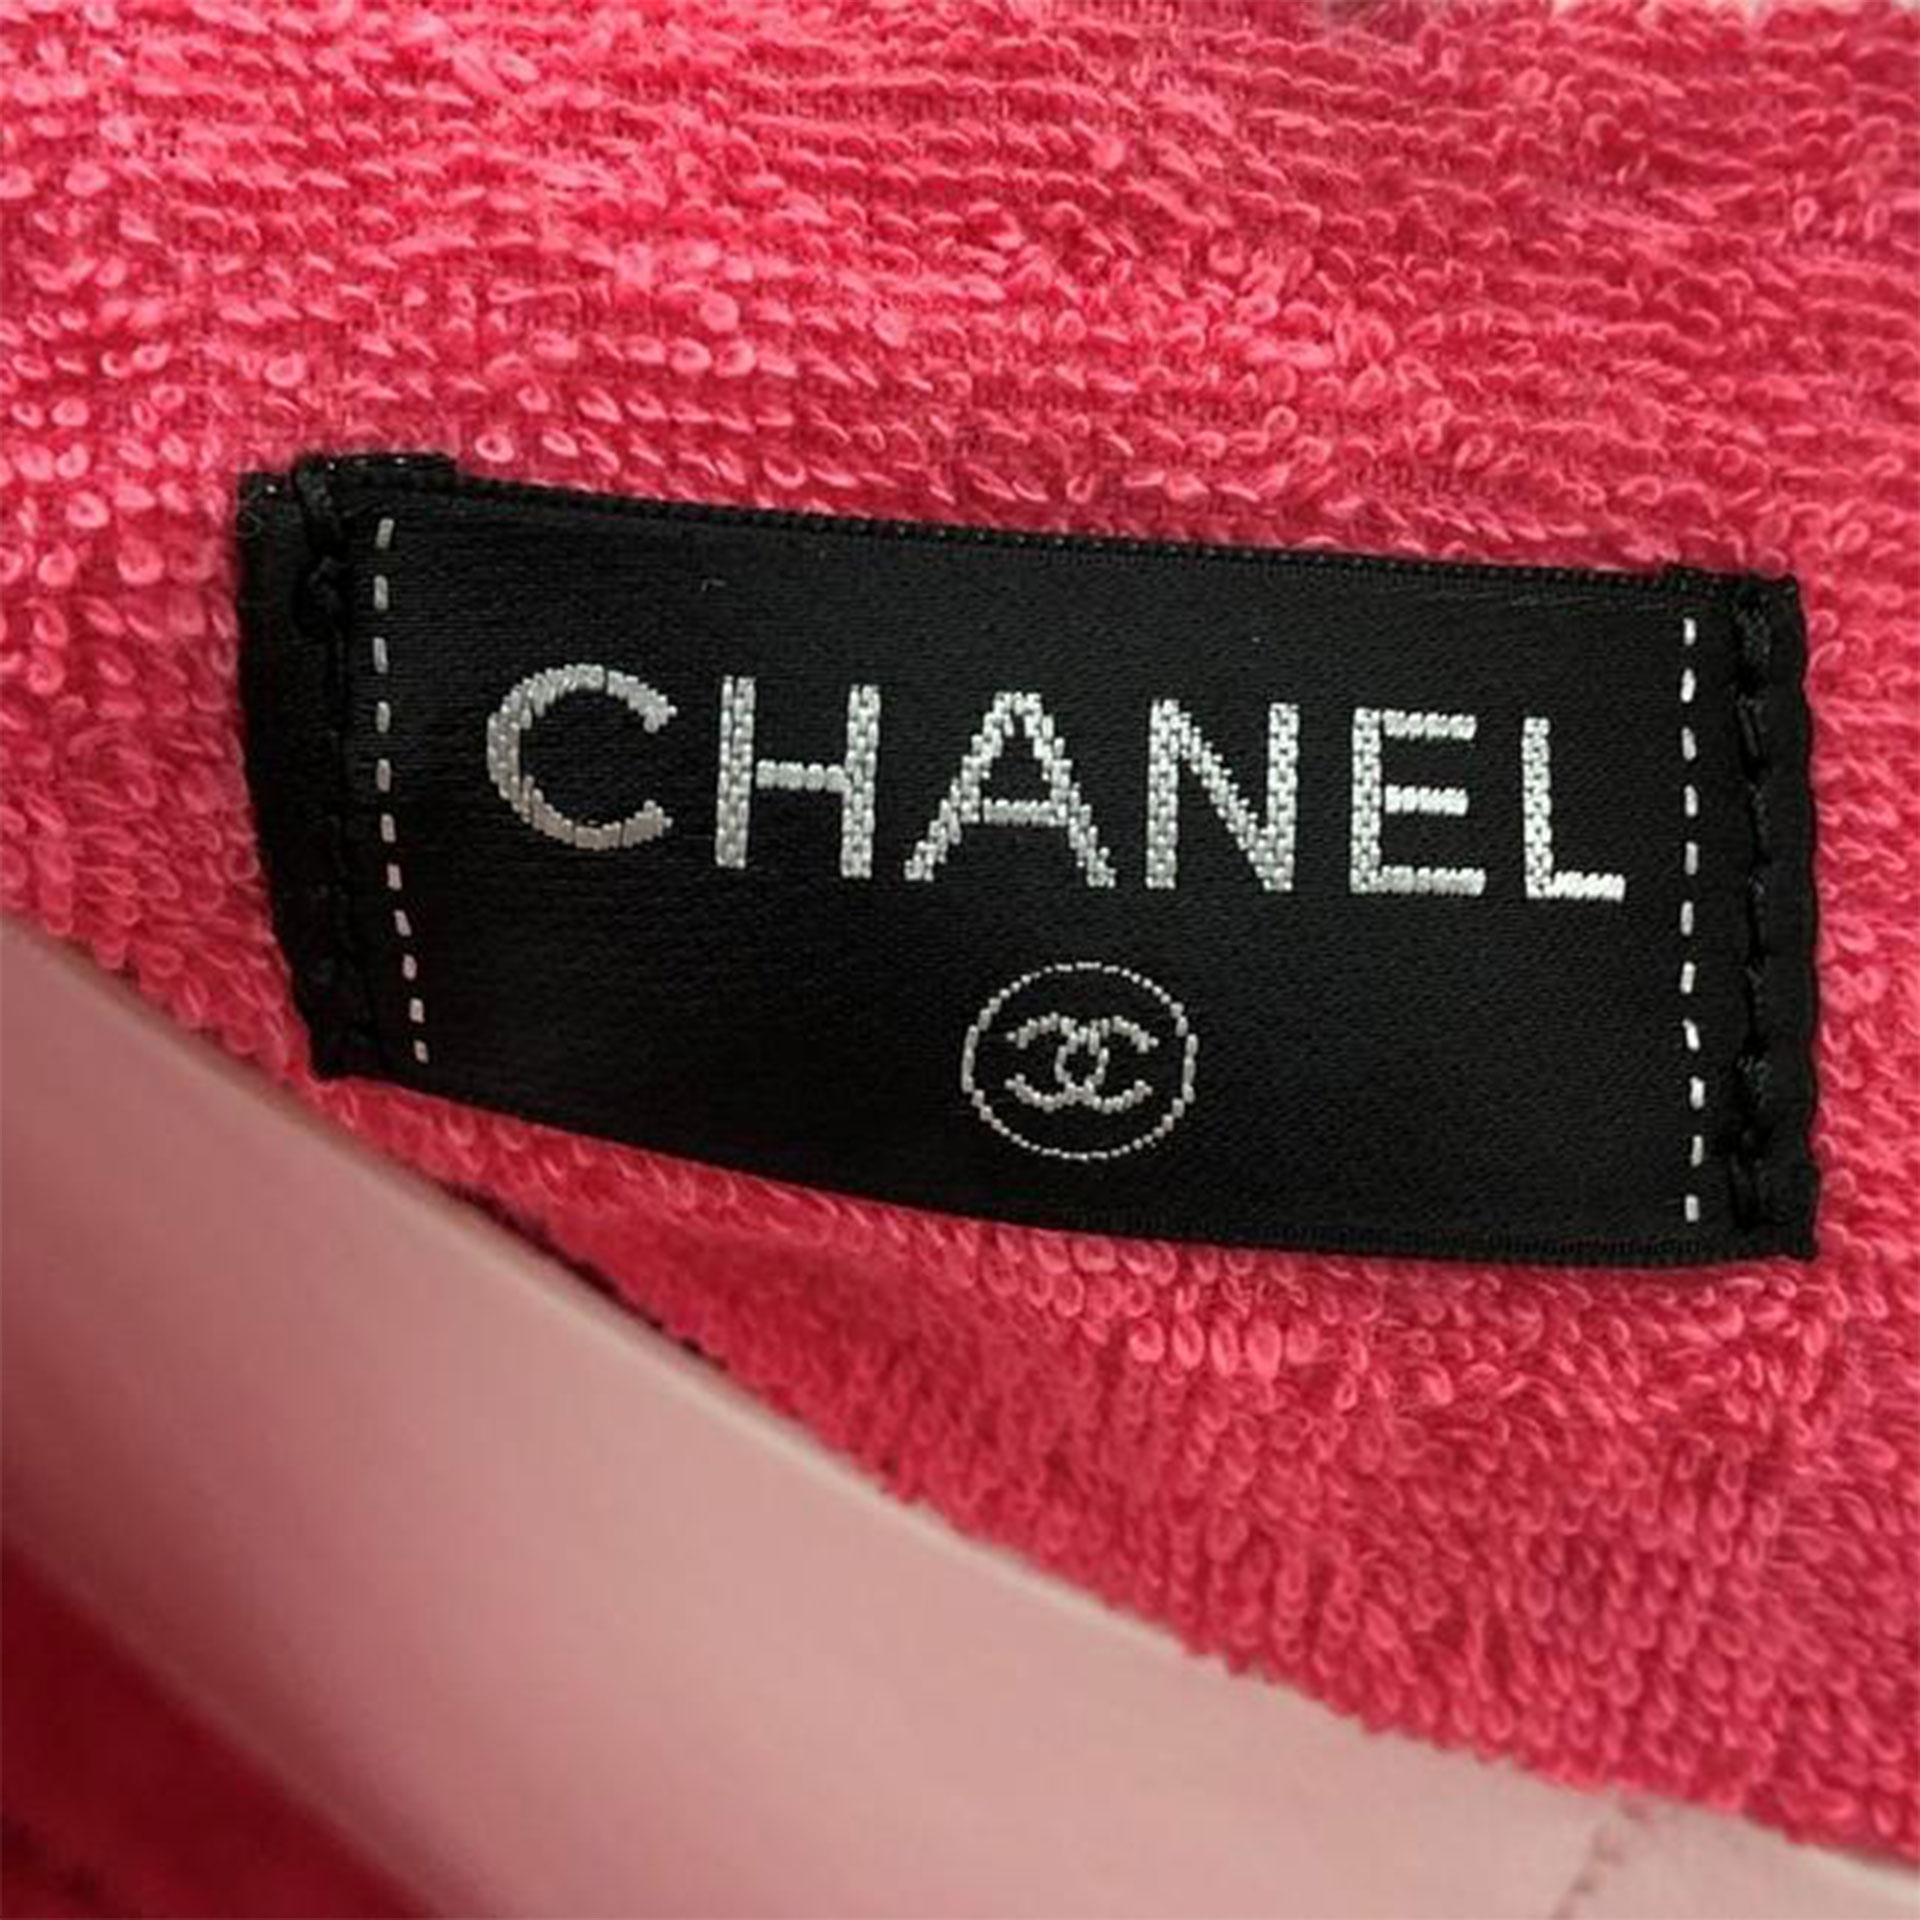 Chanel Cc Beach Medium Pink Terry Cloth Tote In Good Condition For Sale In Miami, FL